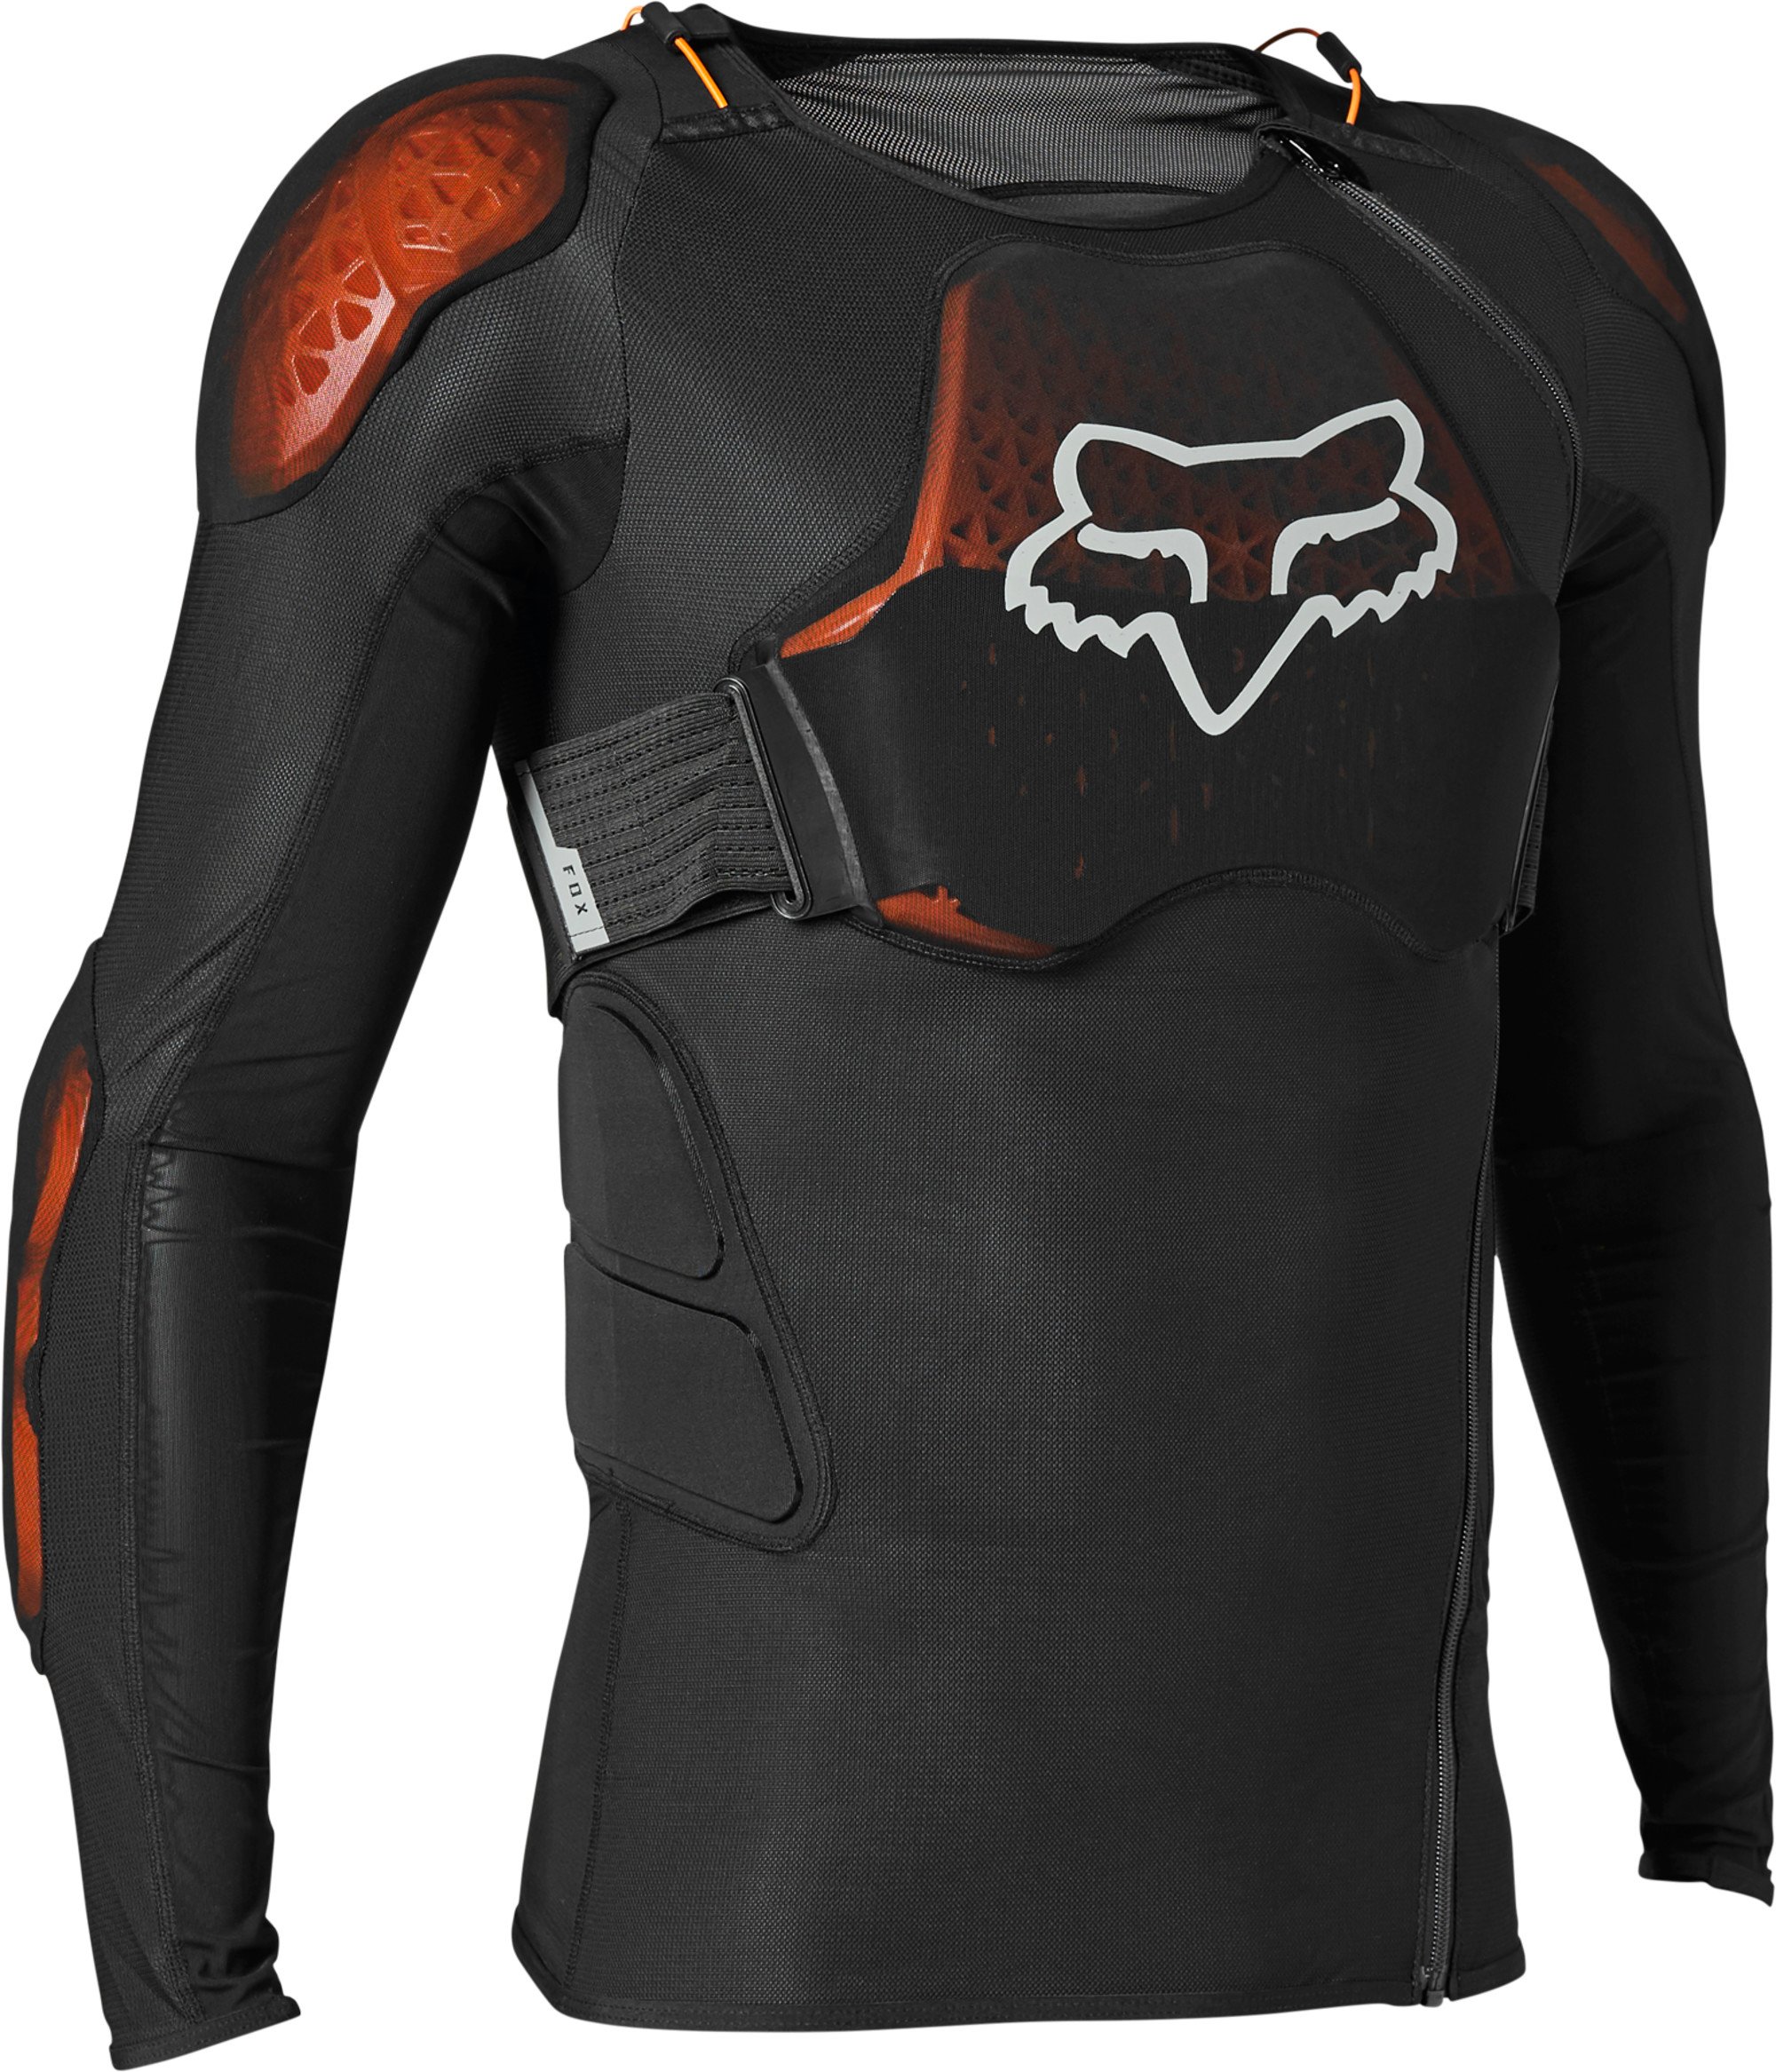 fox racing protections  baseframe pro d30 jacket under protection - dirt bike